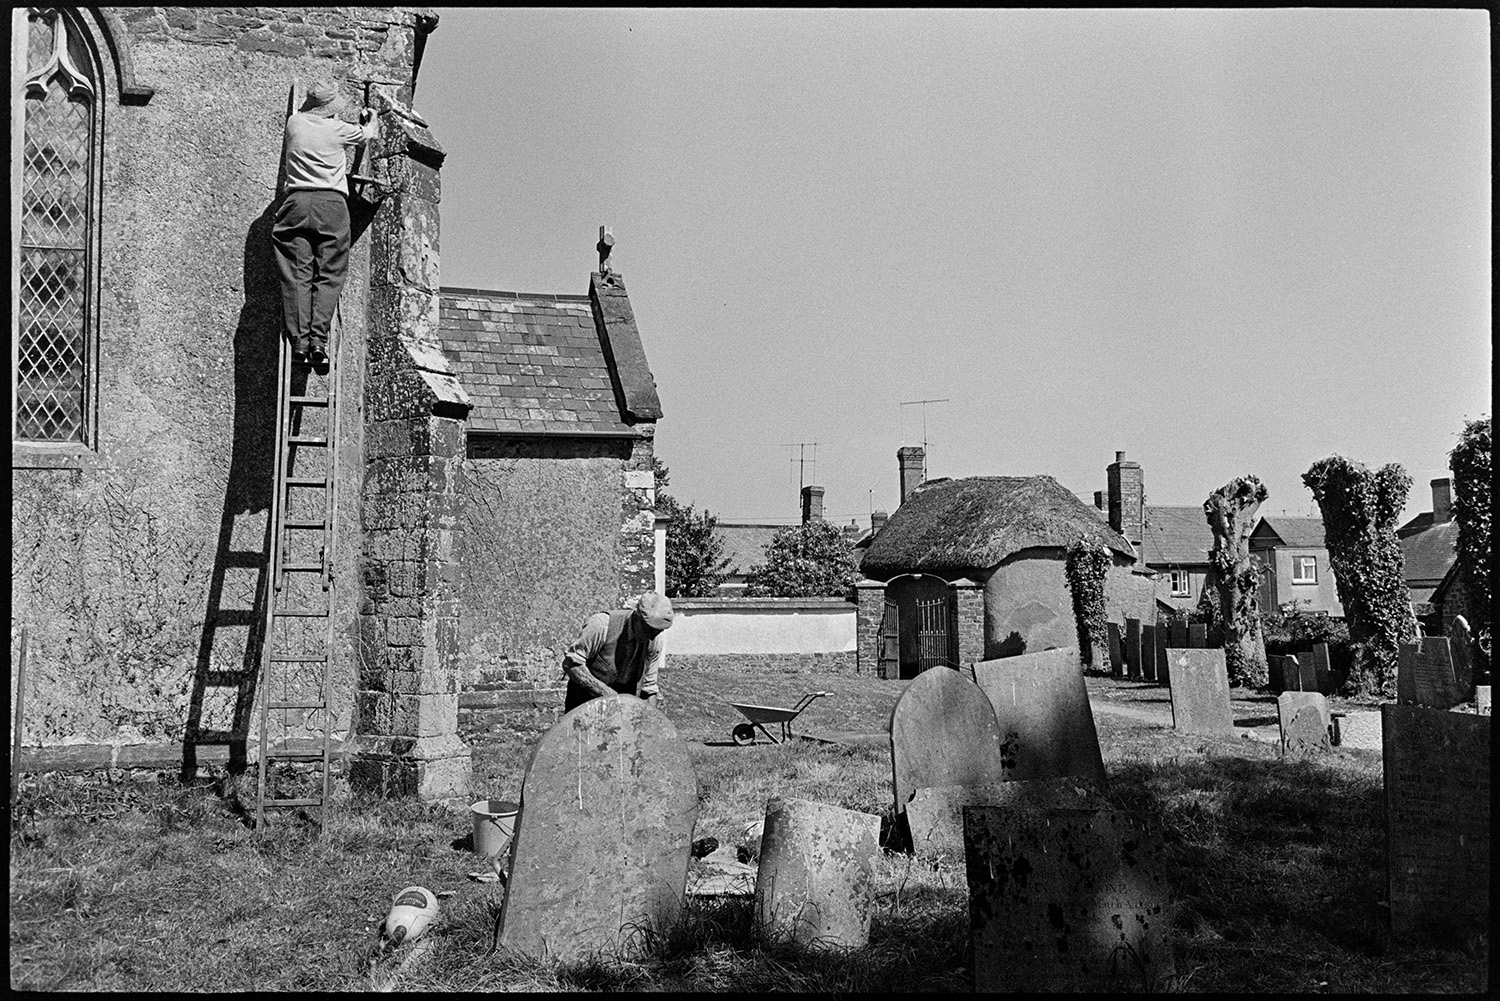 Vicar and helpers repairing church.
[Two men doing repair work at Kings Nympton church. One man is up a ladder repointing stonework while another man is working behind a gravestone, possibly mixing mortar. Pollarded trees can be seen in the churchyard and thatched cottages and houses are visible in the background.]